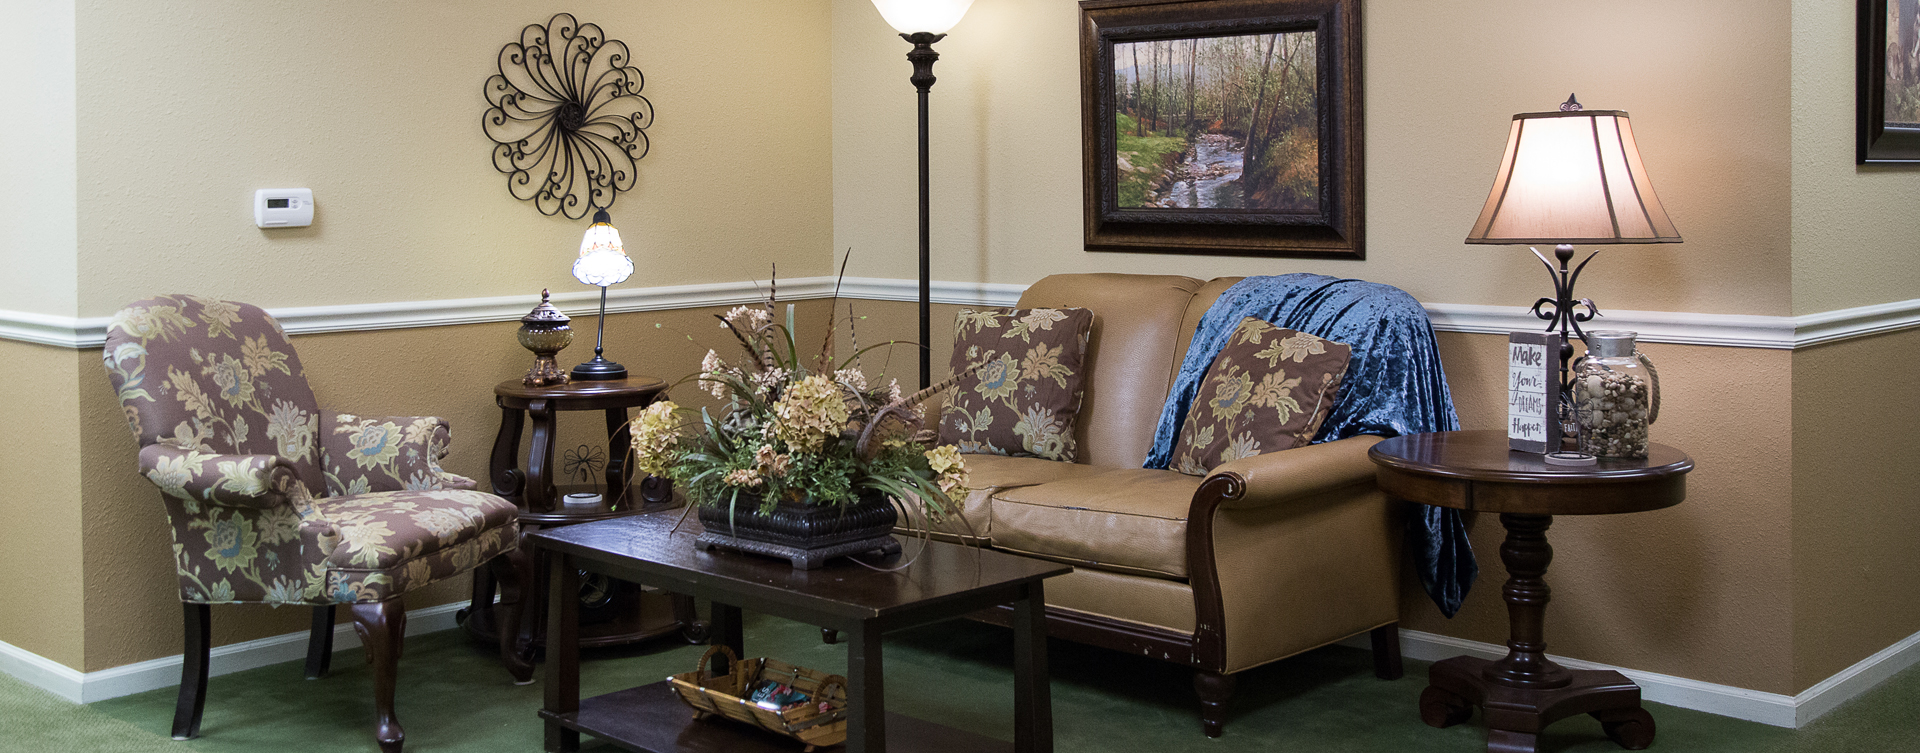 Enjoy a good snooze in the sitting area at Bickford of Moline